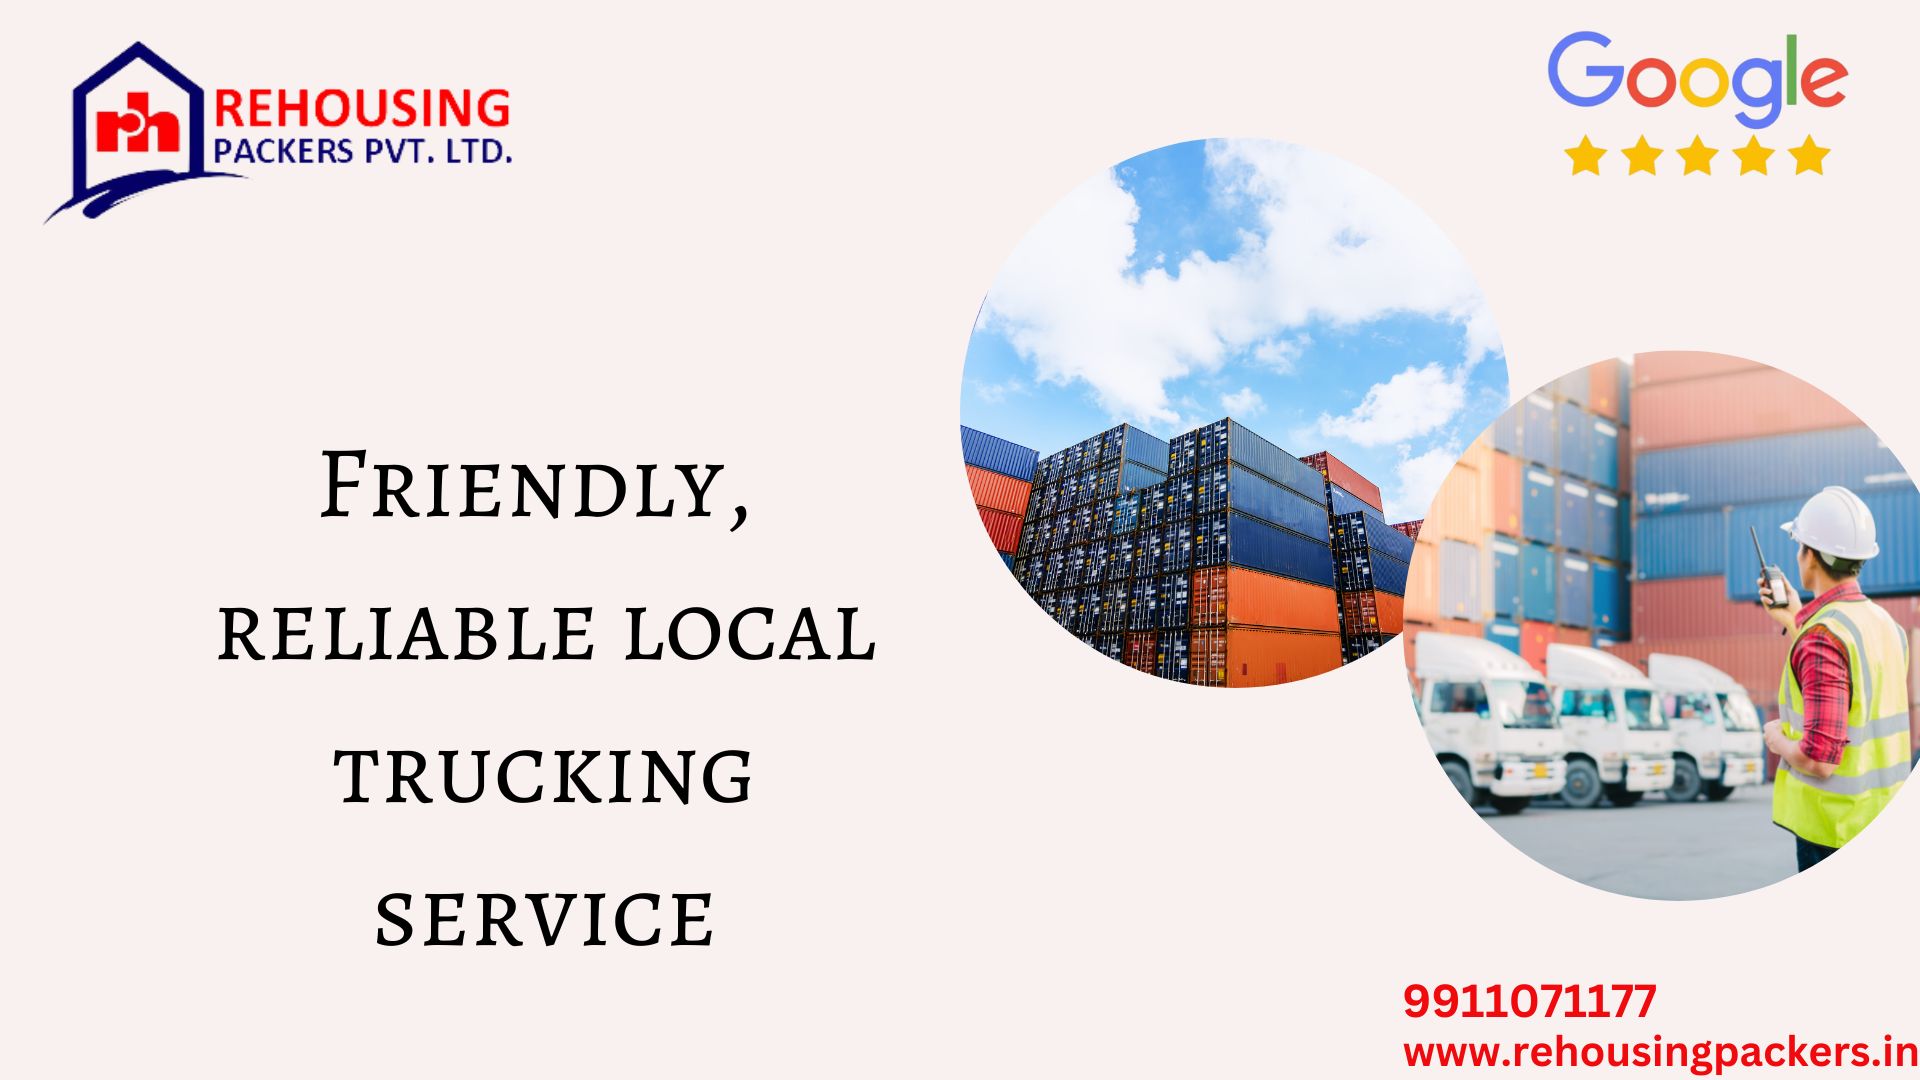 Packers and Movers Rates list for Local House Shifting In Pune